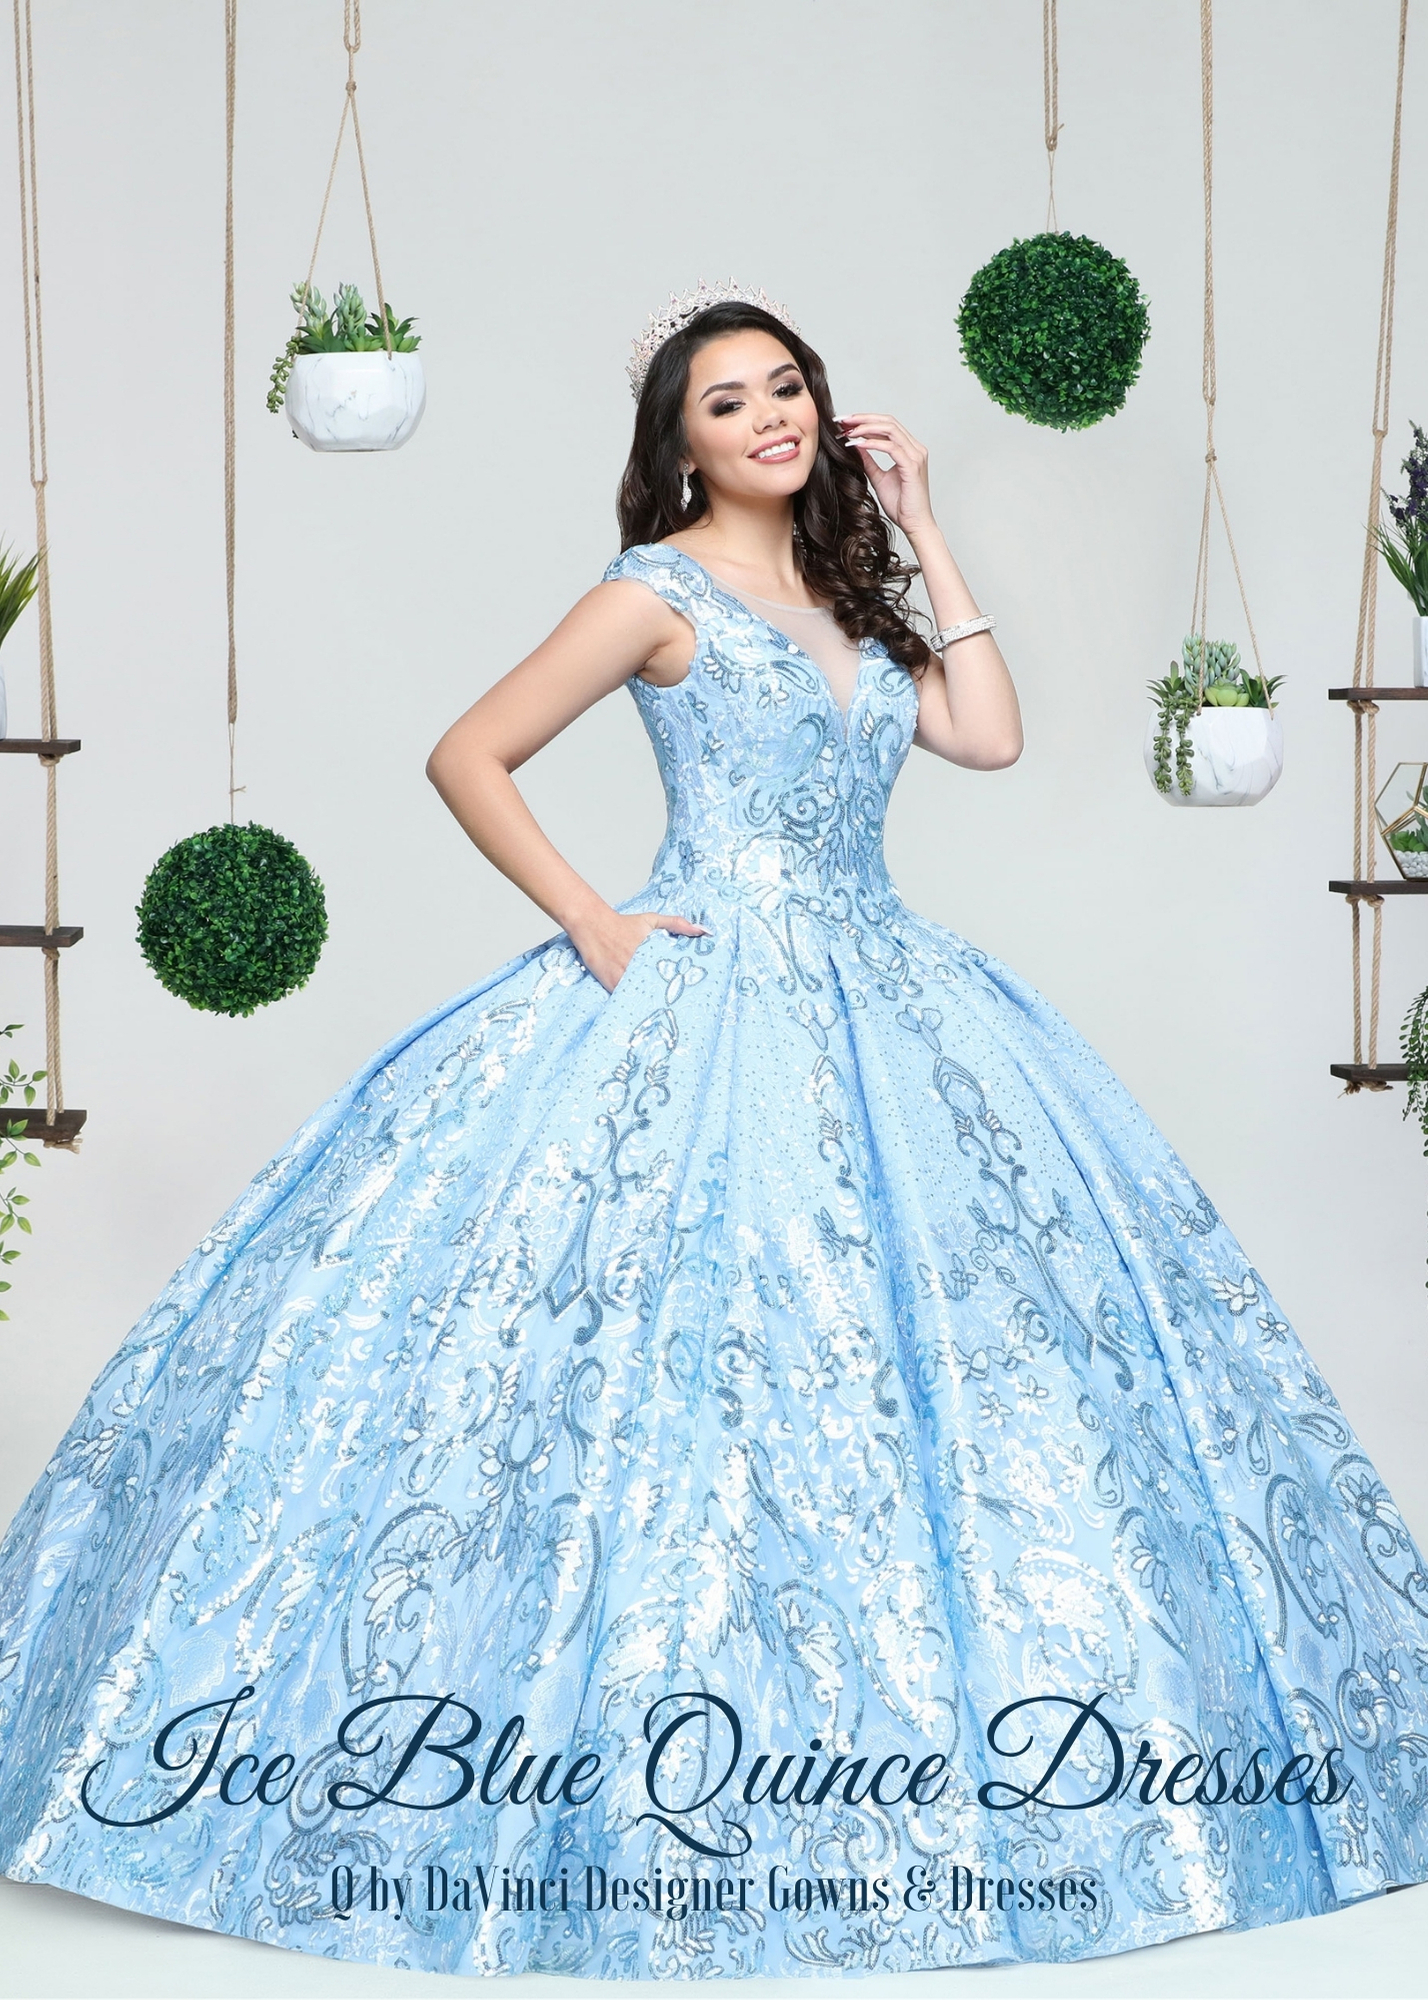 Winter Quinceanera Dresses in Ice Blue for 2021 - Q By DaVinci Blog